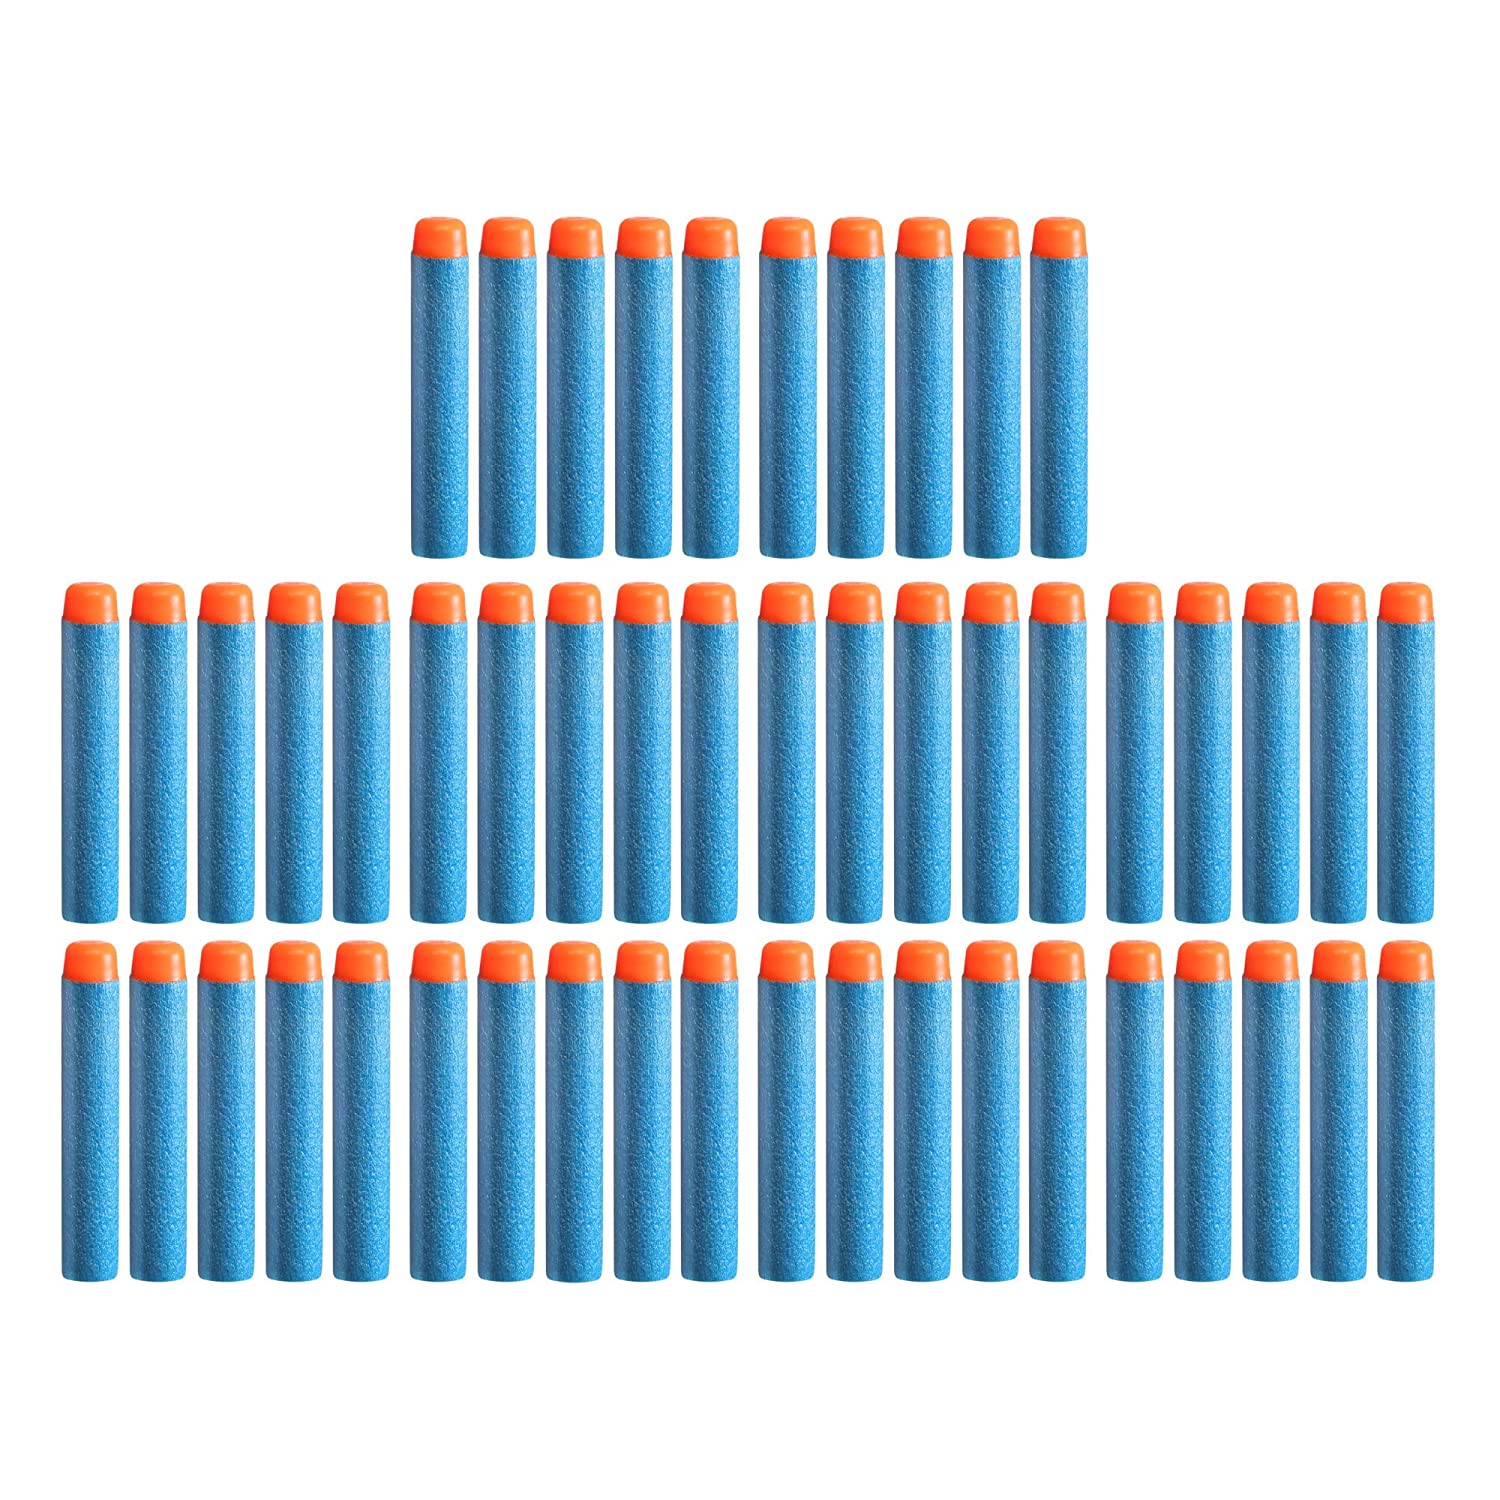 Nerf Elite 2.0 50-Dart Refill Pack, 50 Official Nerf Elite 2.0 Foam Darts,Compatible with All Nerf Blasters That Use Elite Darts